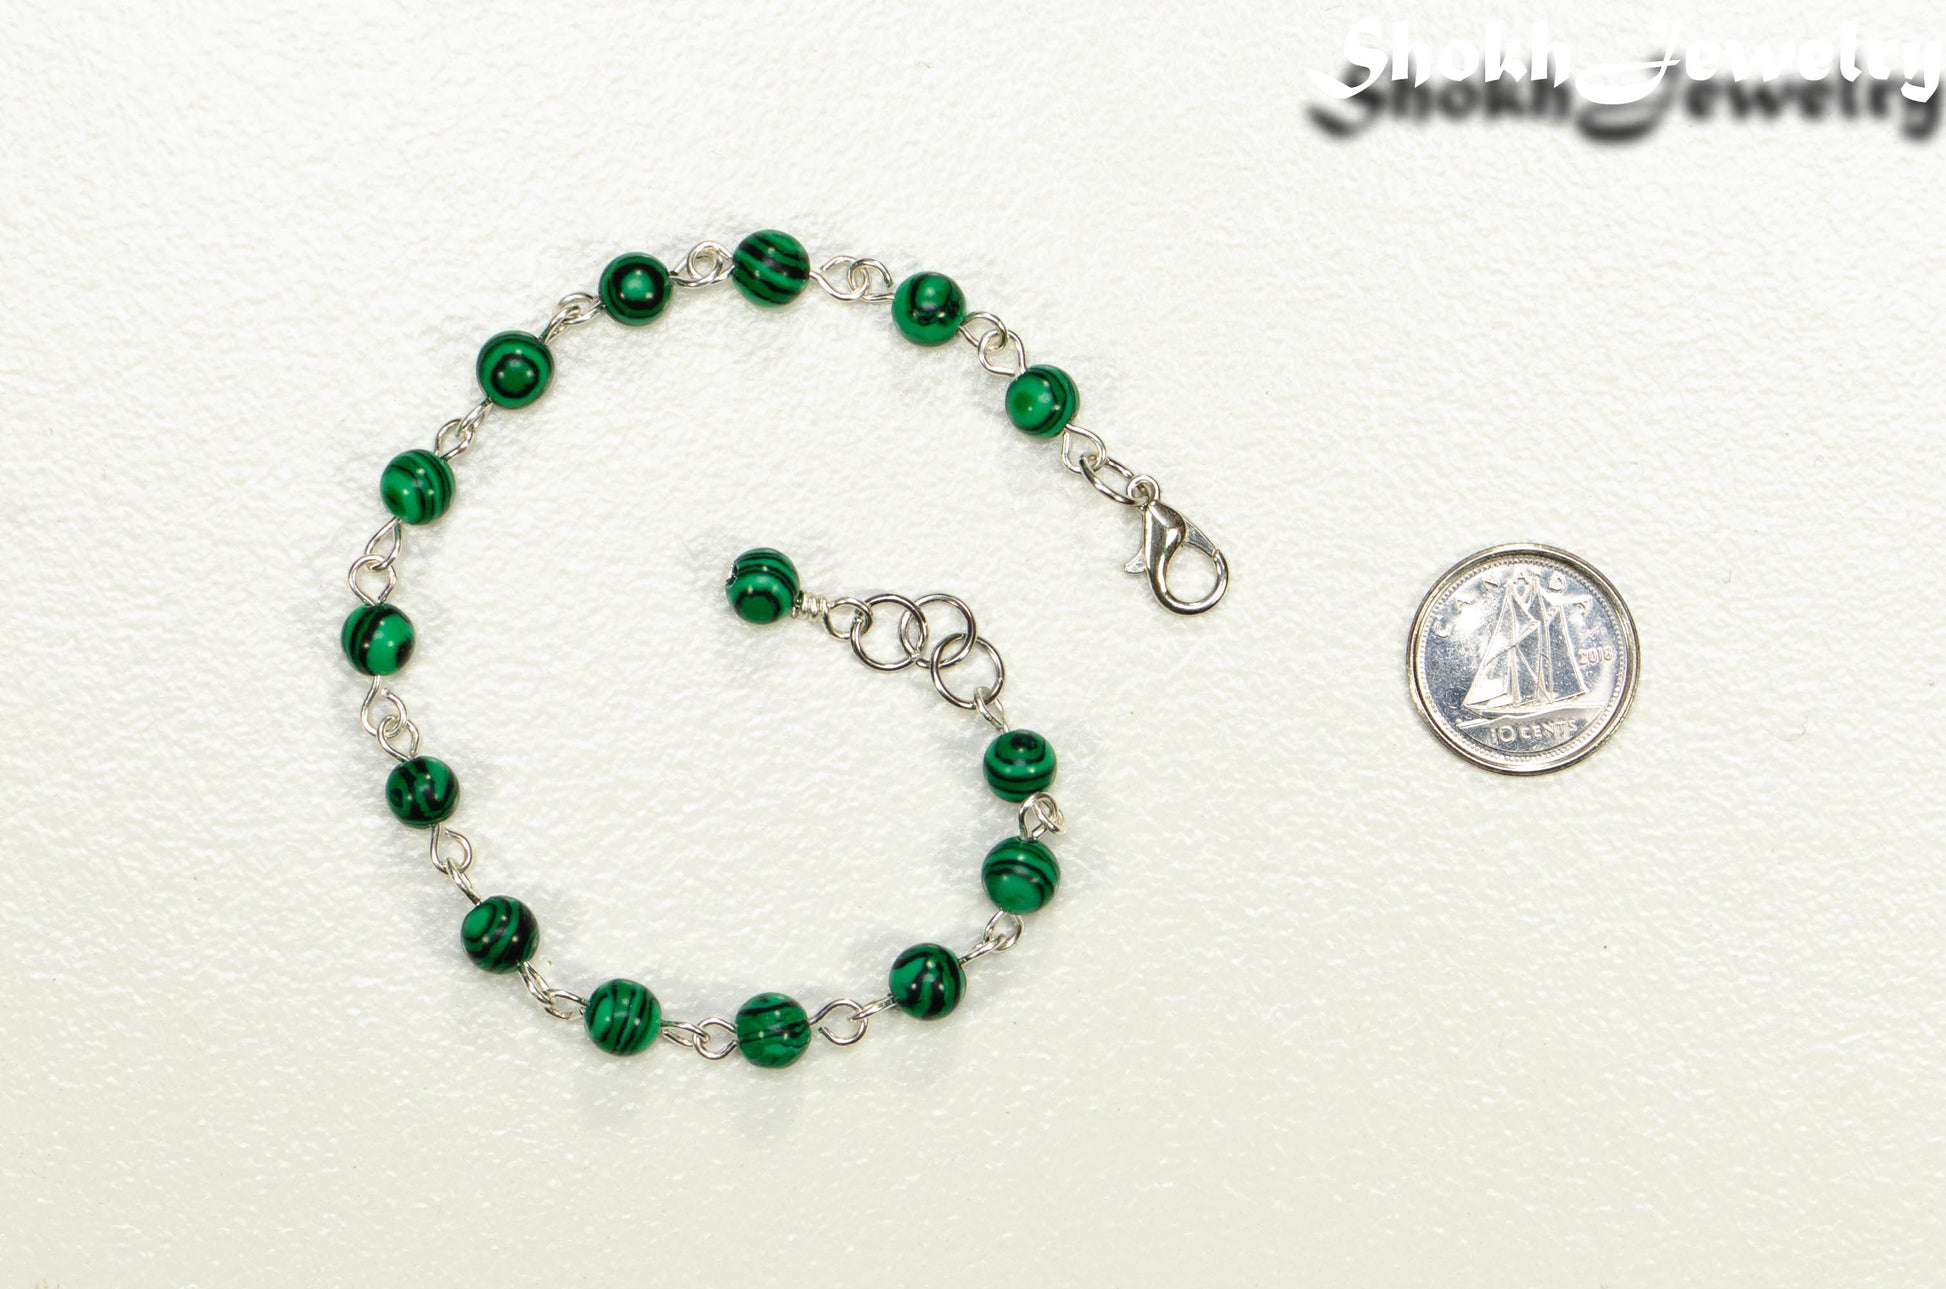 6mm Malachite Link chain anklet beside a dime.